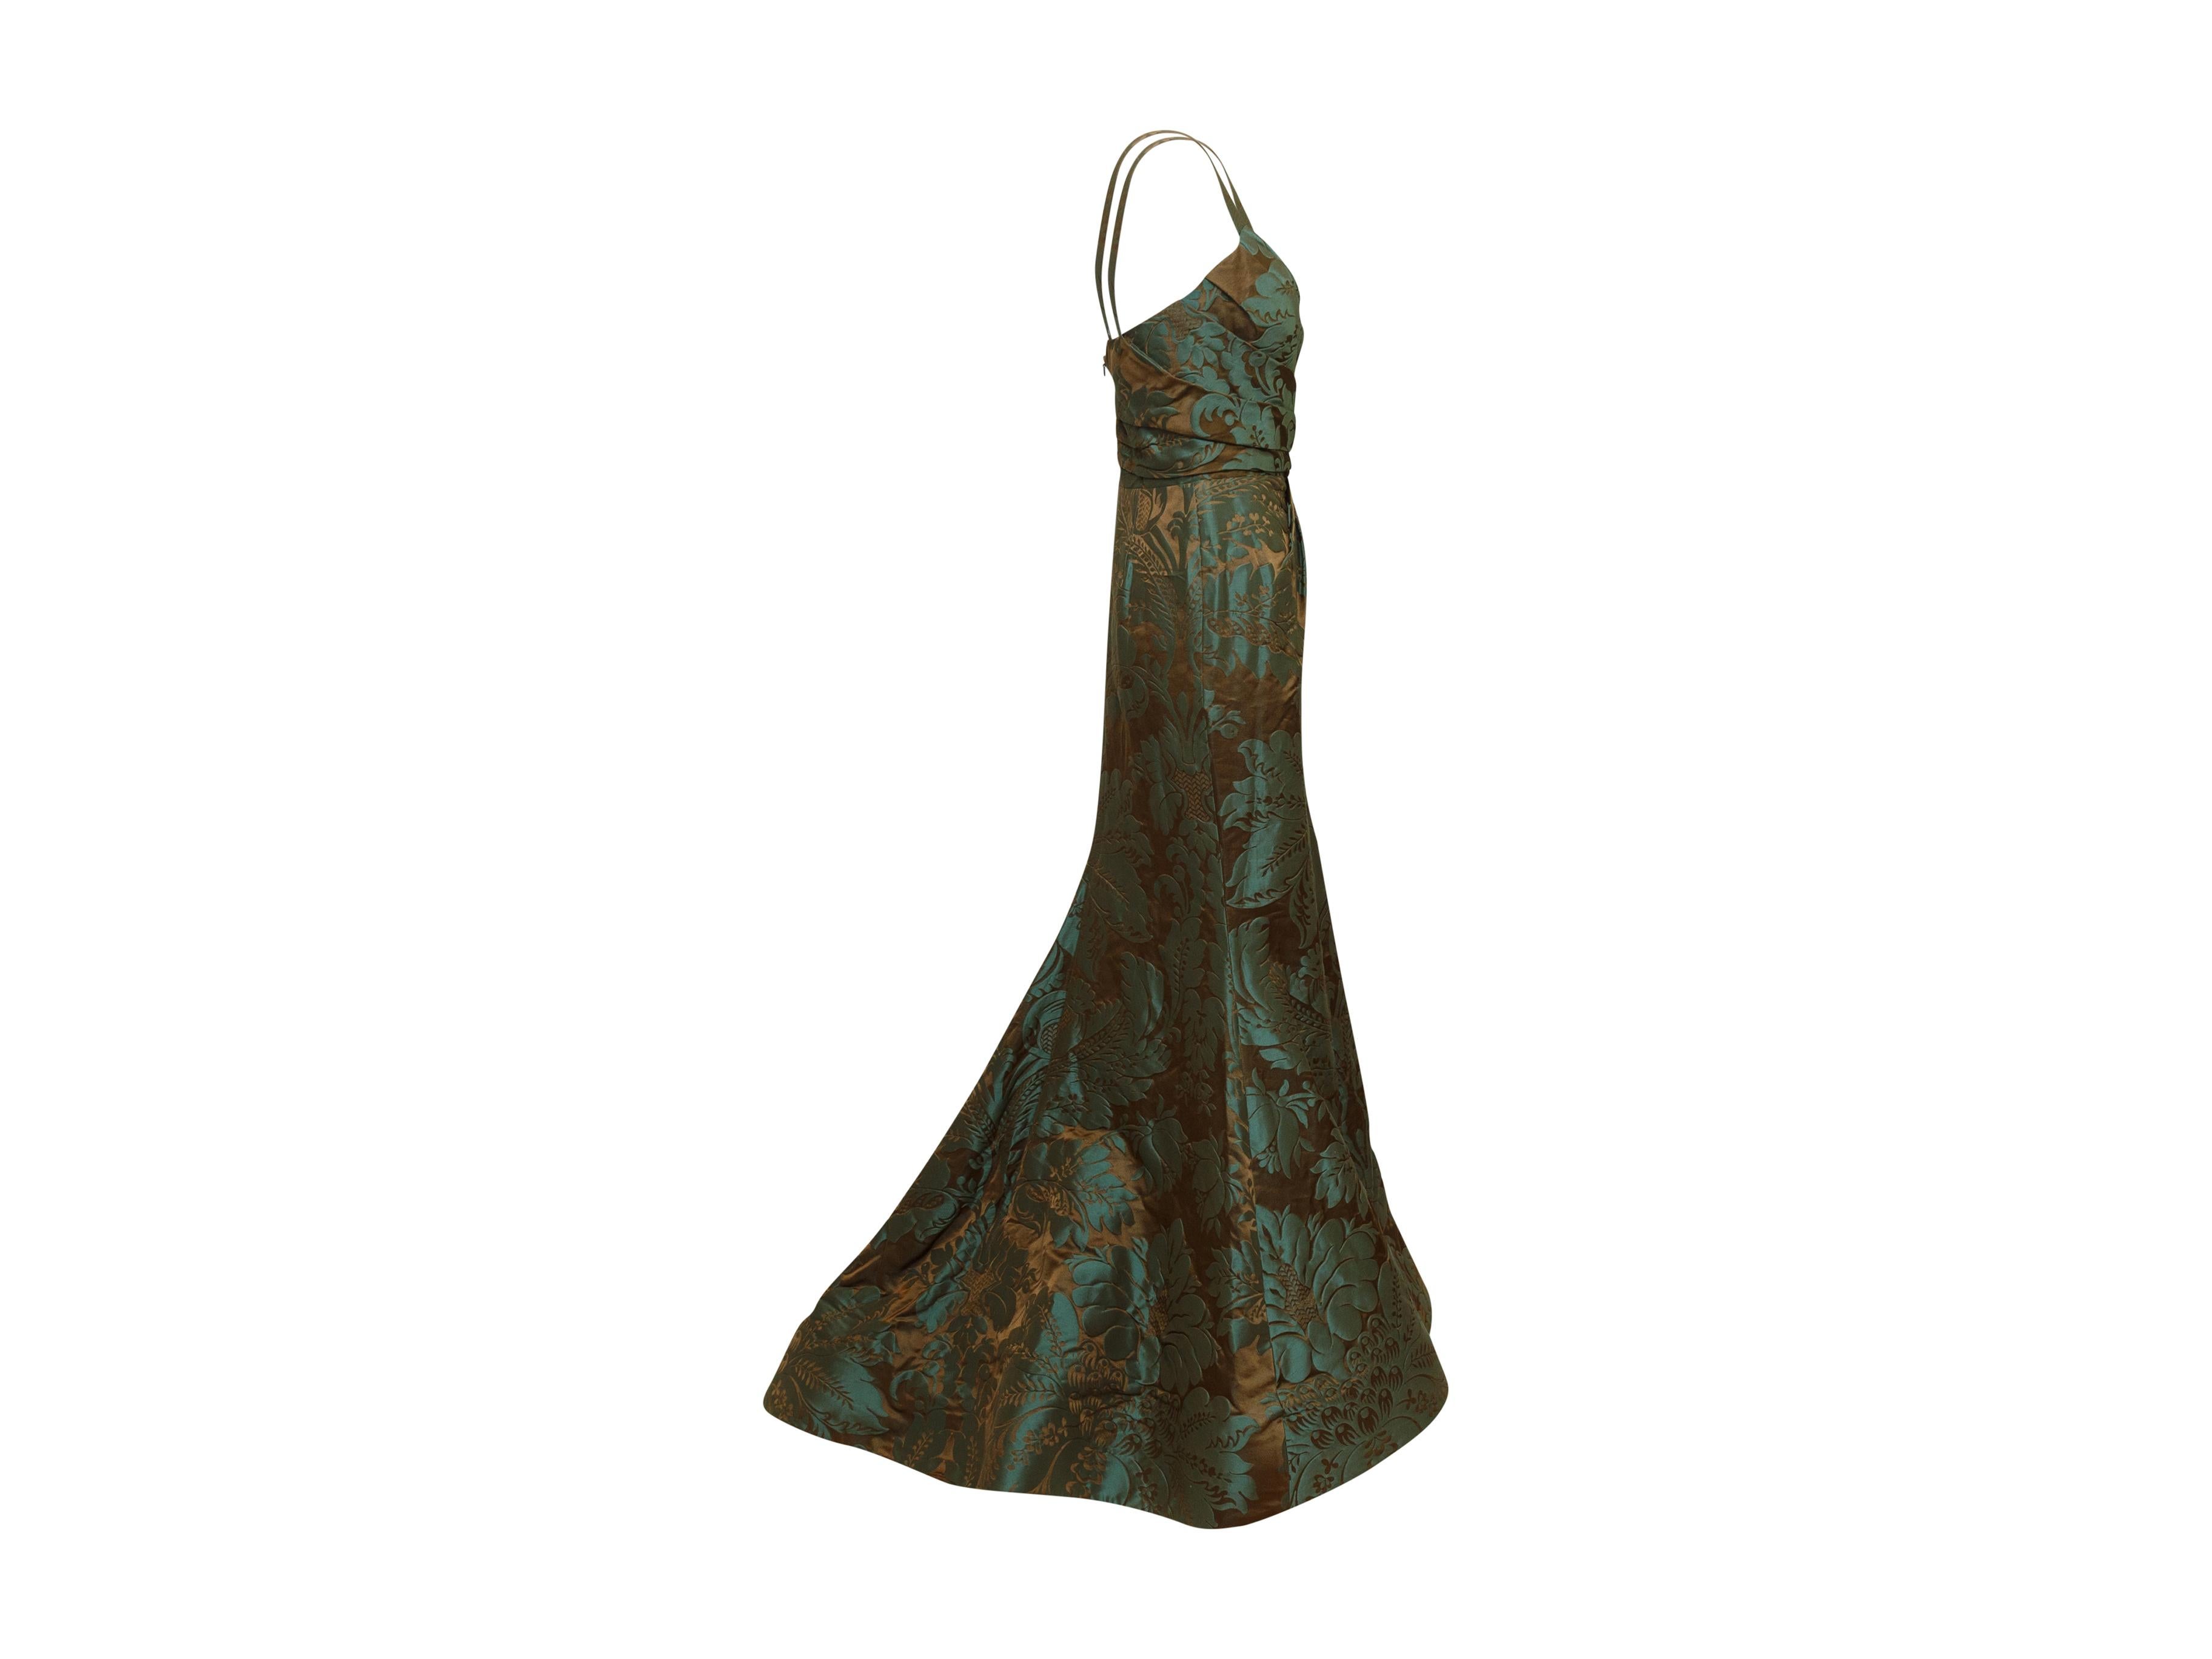 Product details: Teal and brown jacquard bustier gown by Oscar de la Renta. From the Fall 2011 Collection. Surplice neckline. Boning at interior bodice. Brocade pattern throughout. Zip closure at back. 31